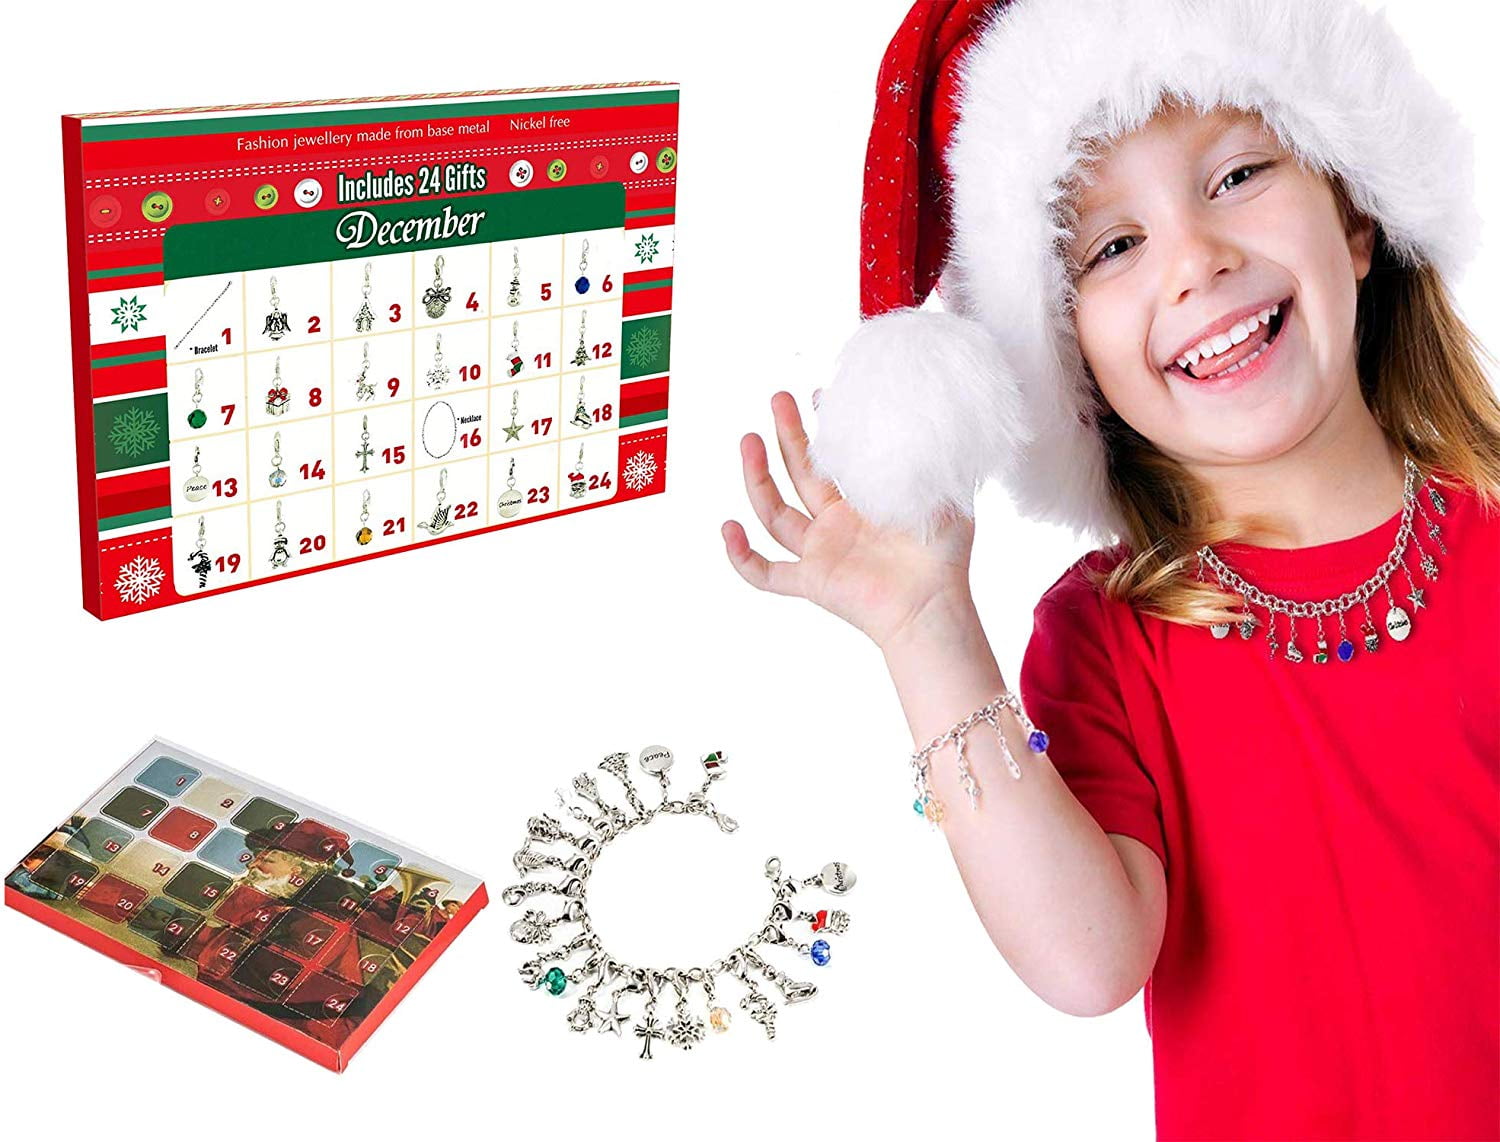 perfect for Christmas Jewellery Advent Calendar Giftsets